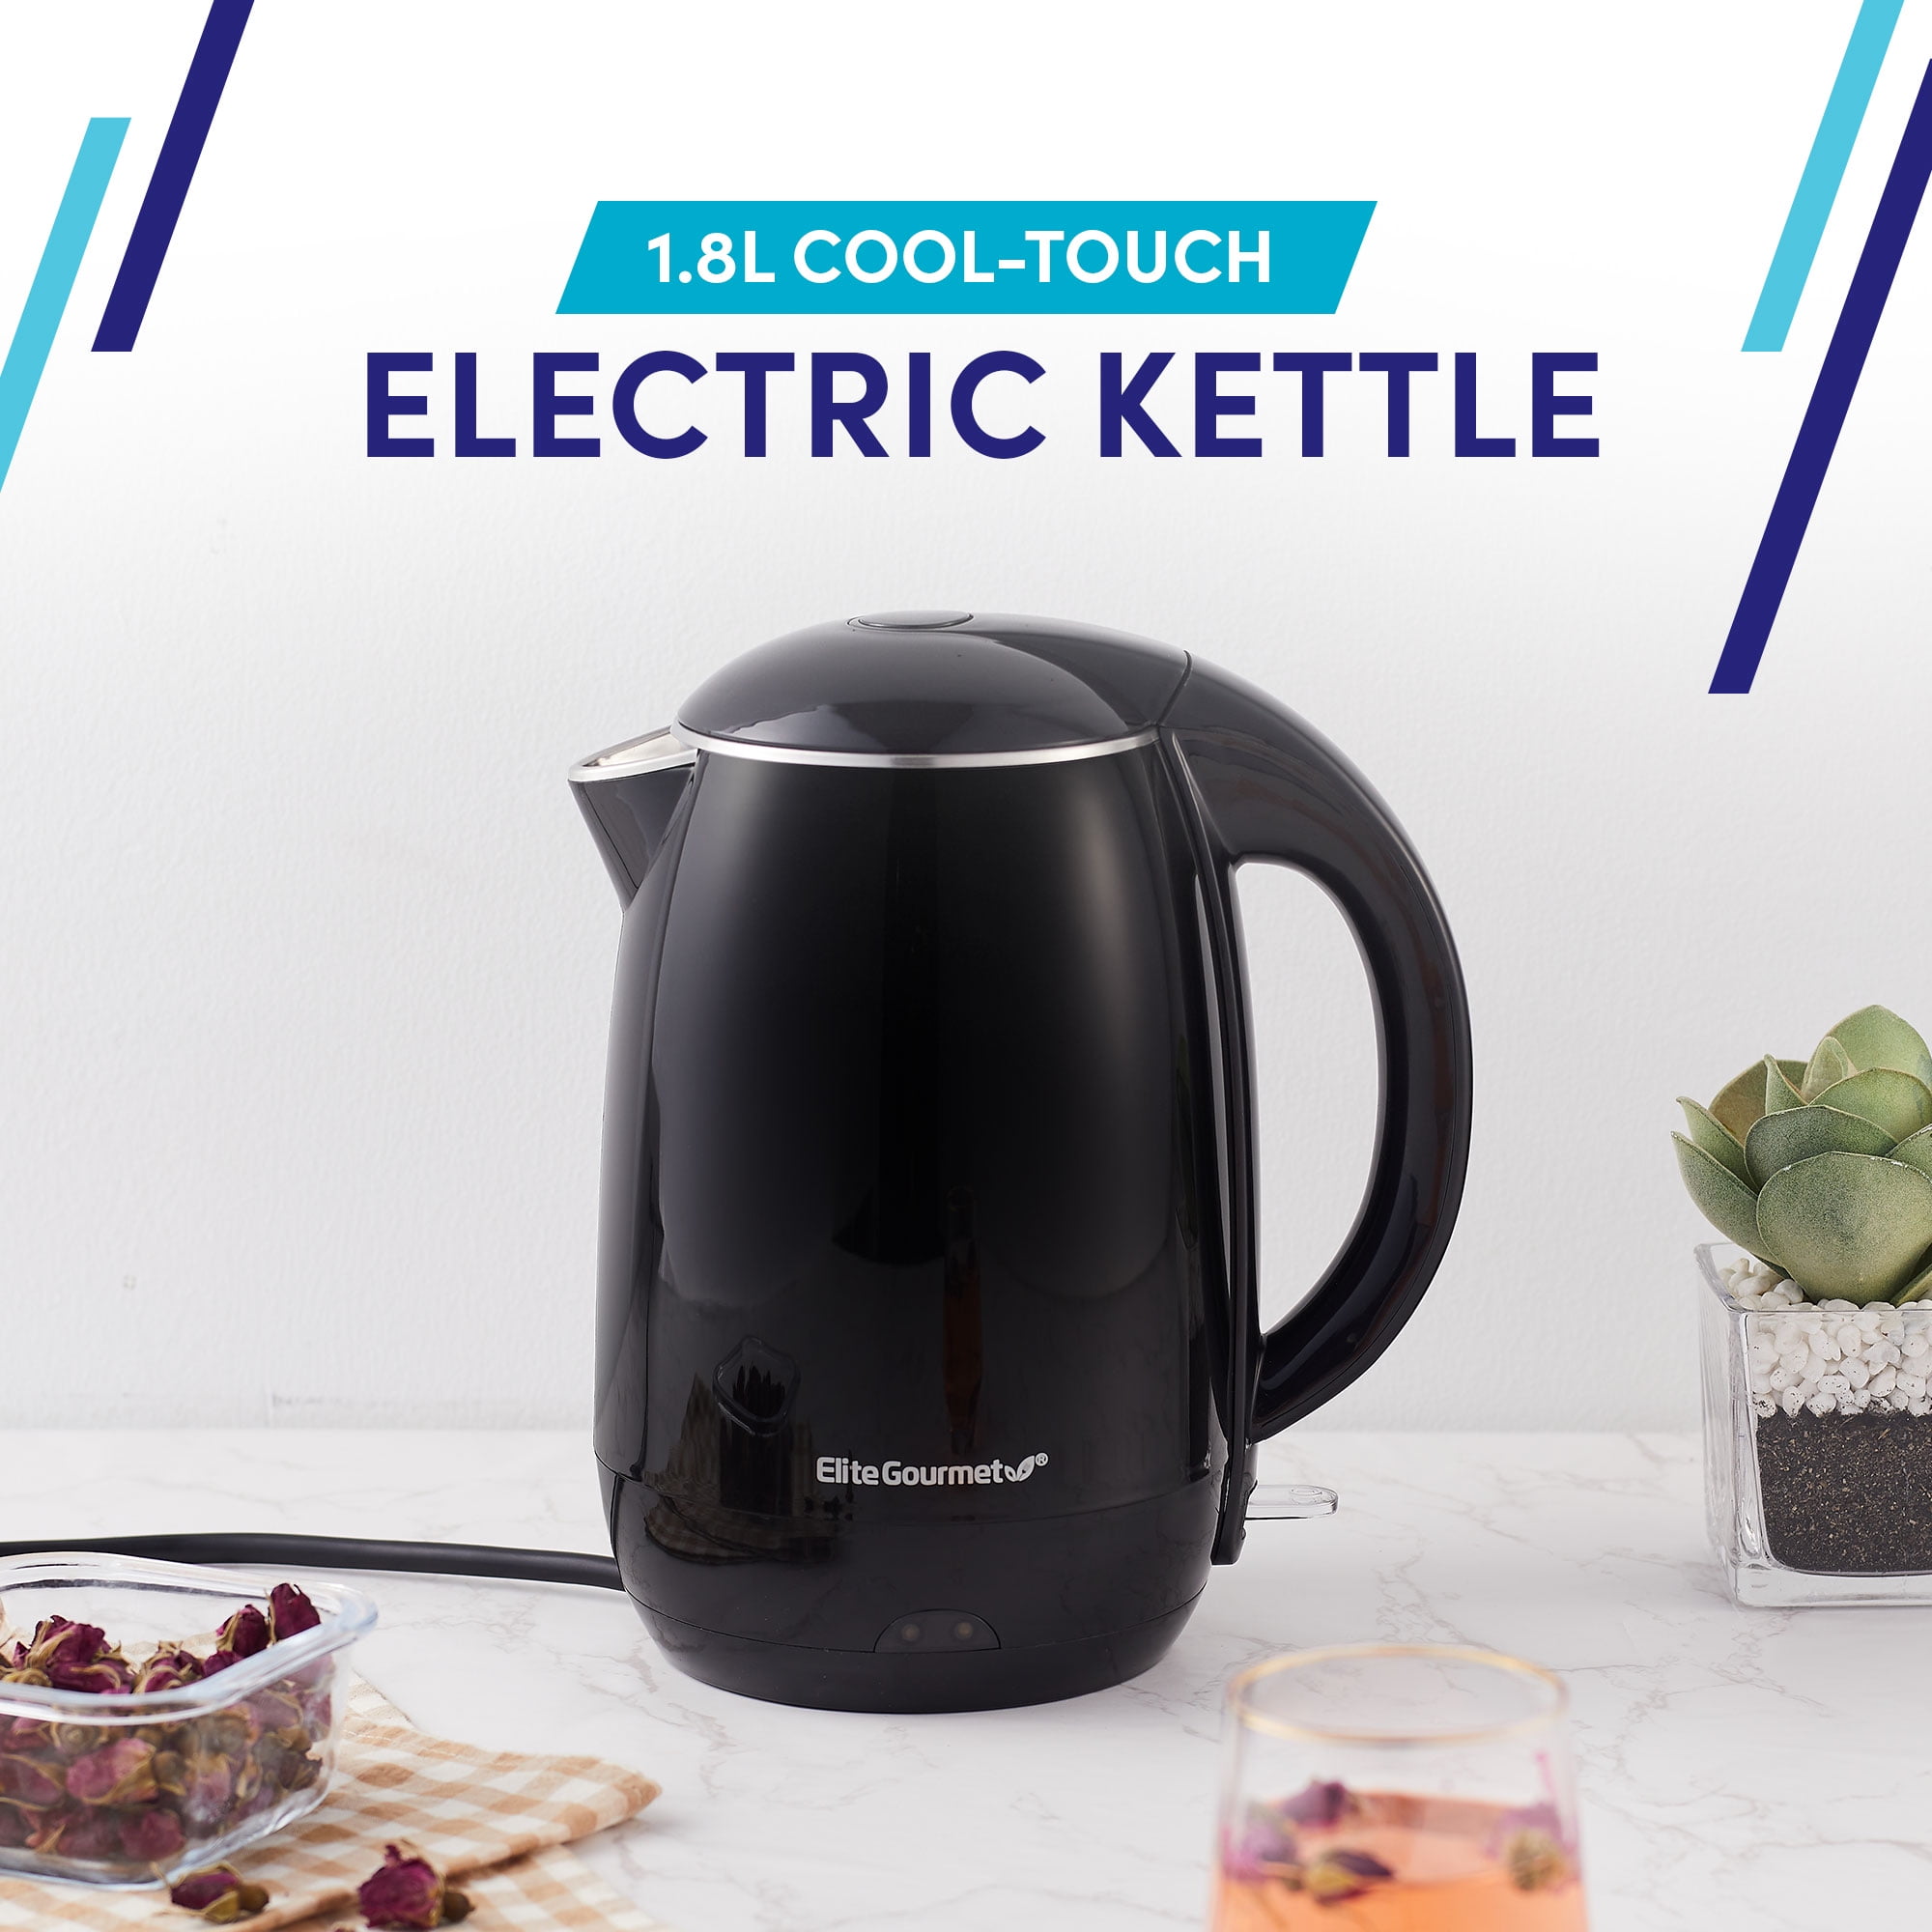 Elite Gourmet 1.8L Cool-Touch Elcteric Kettle with Stainless Steel  Interior, Black